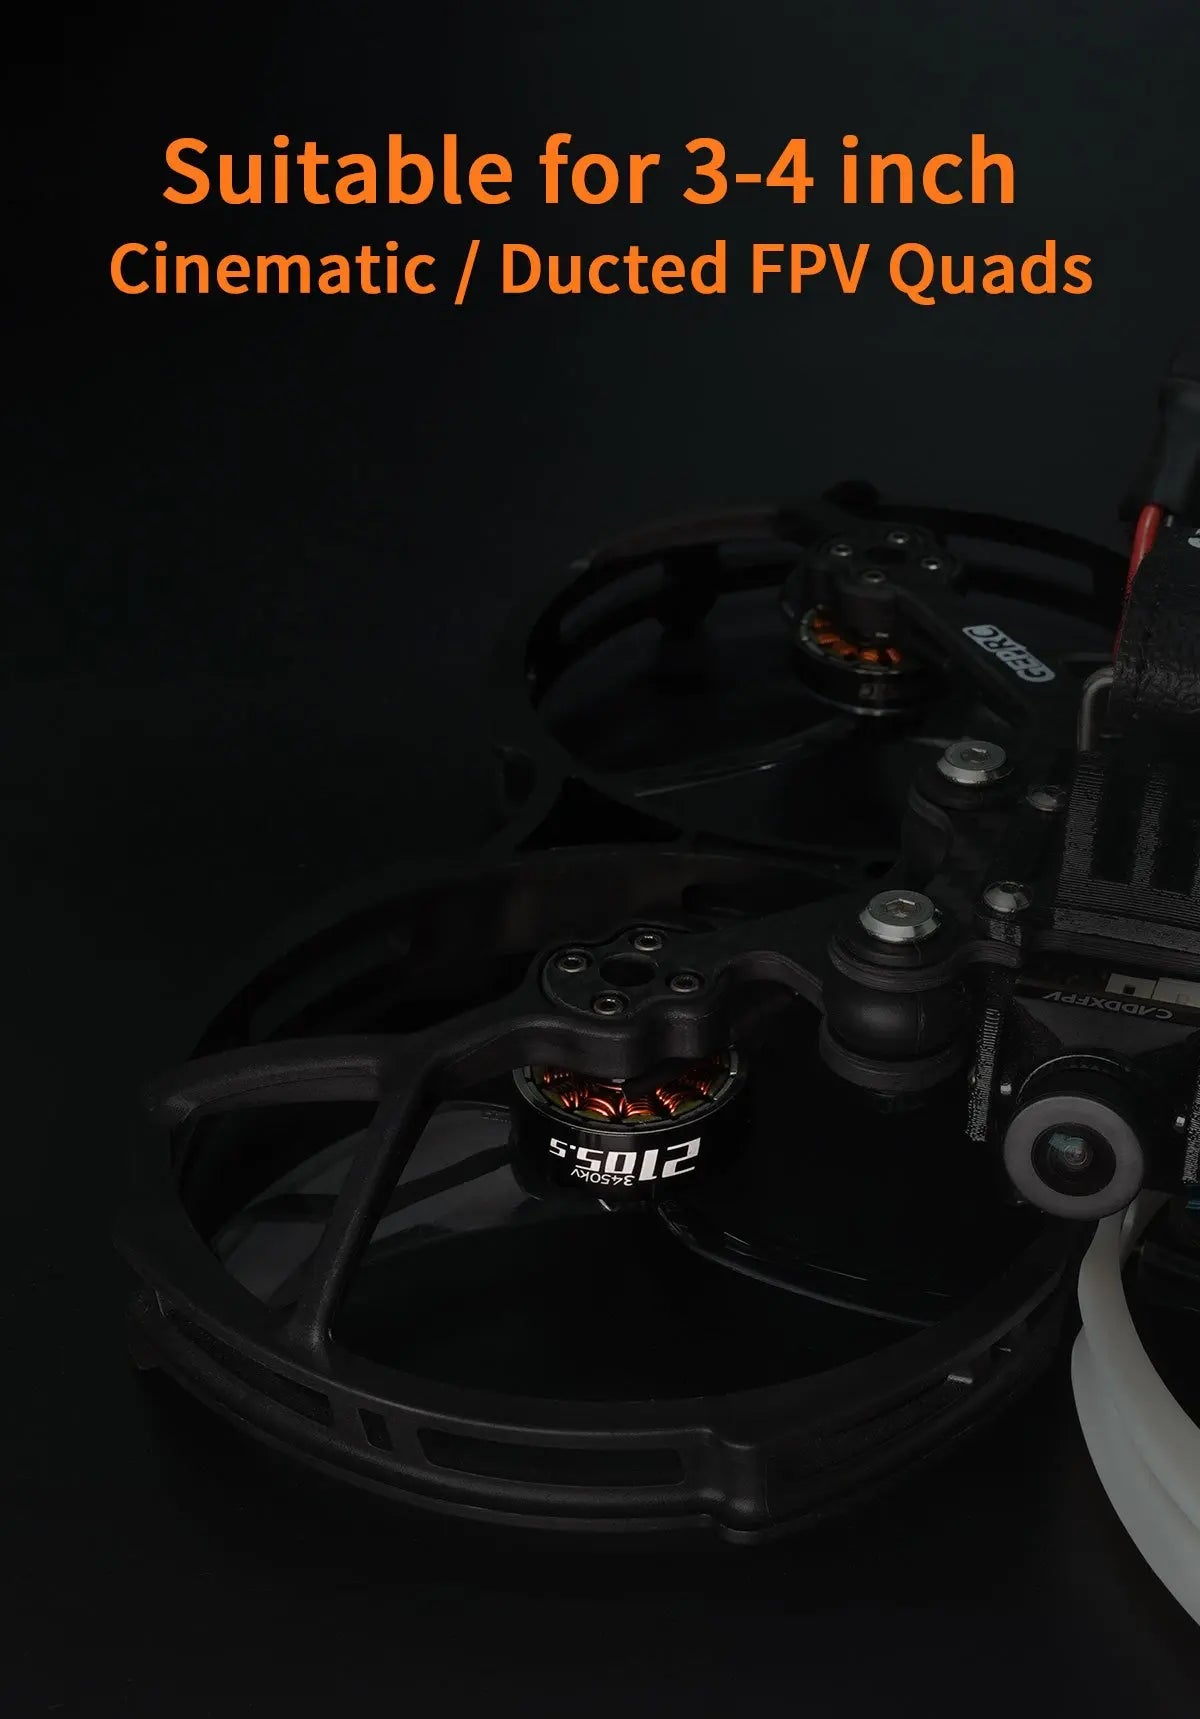 GEPRC SPEEDX2 0803 Brushless Motor, Suitable for 3-4 inch Cinematic Ducted FPV Quads 5201z